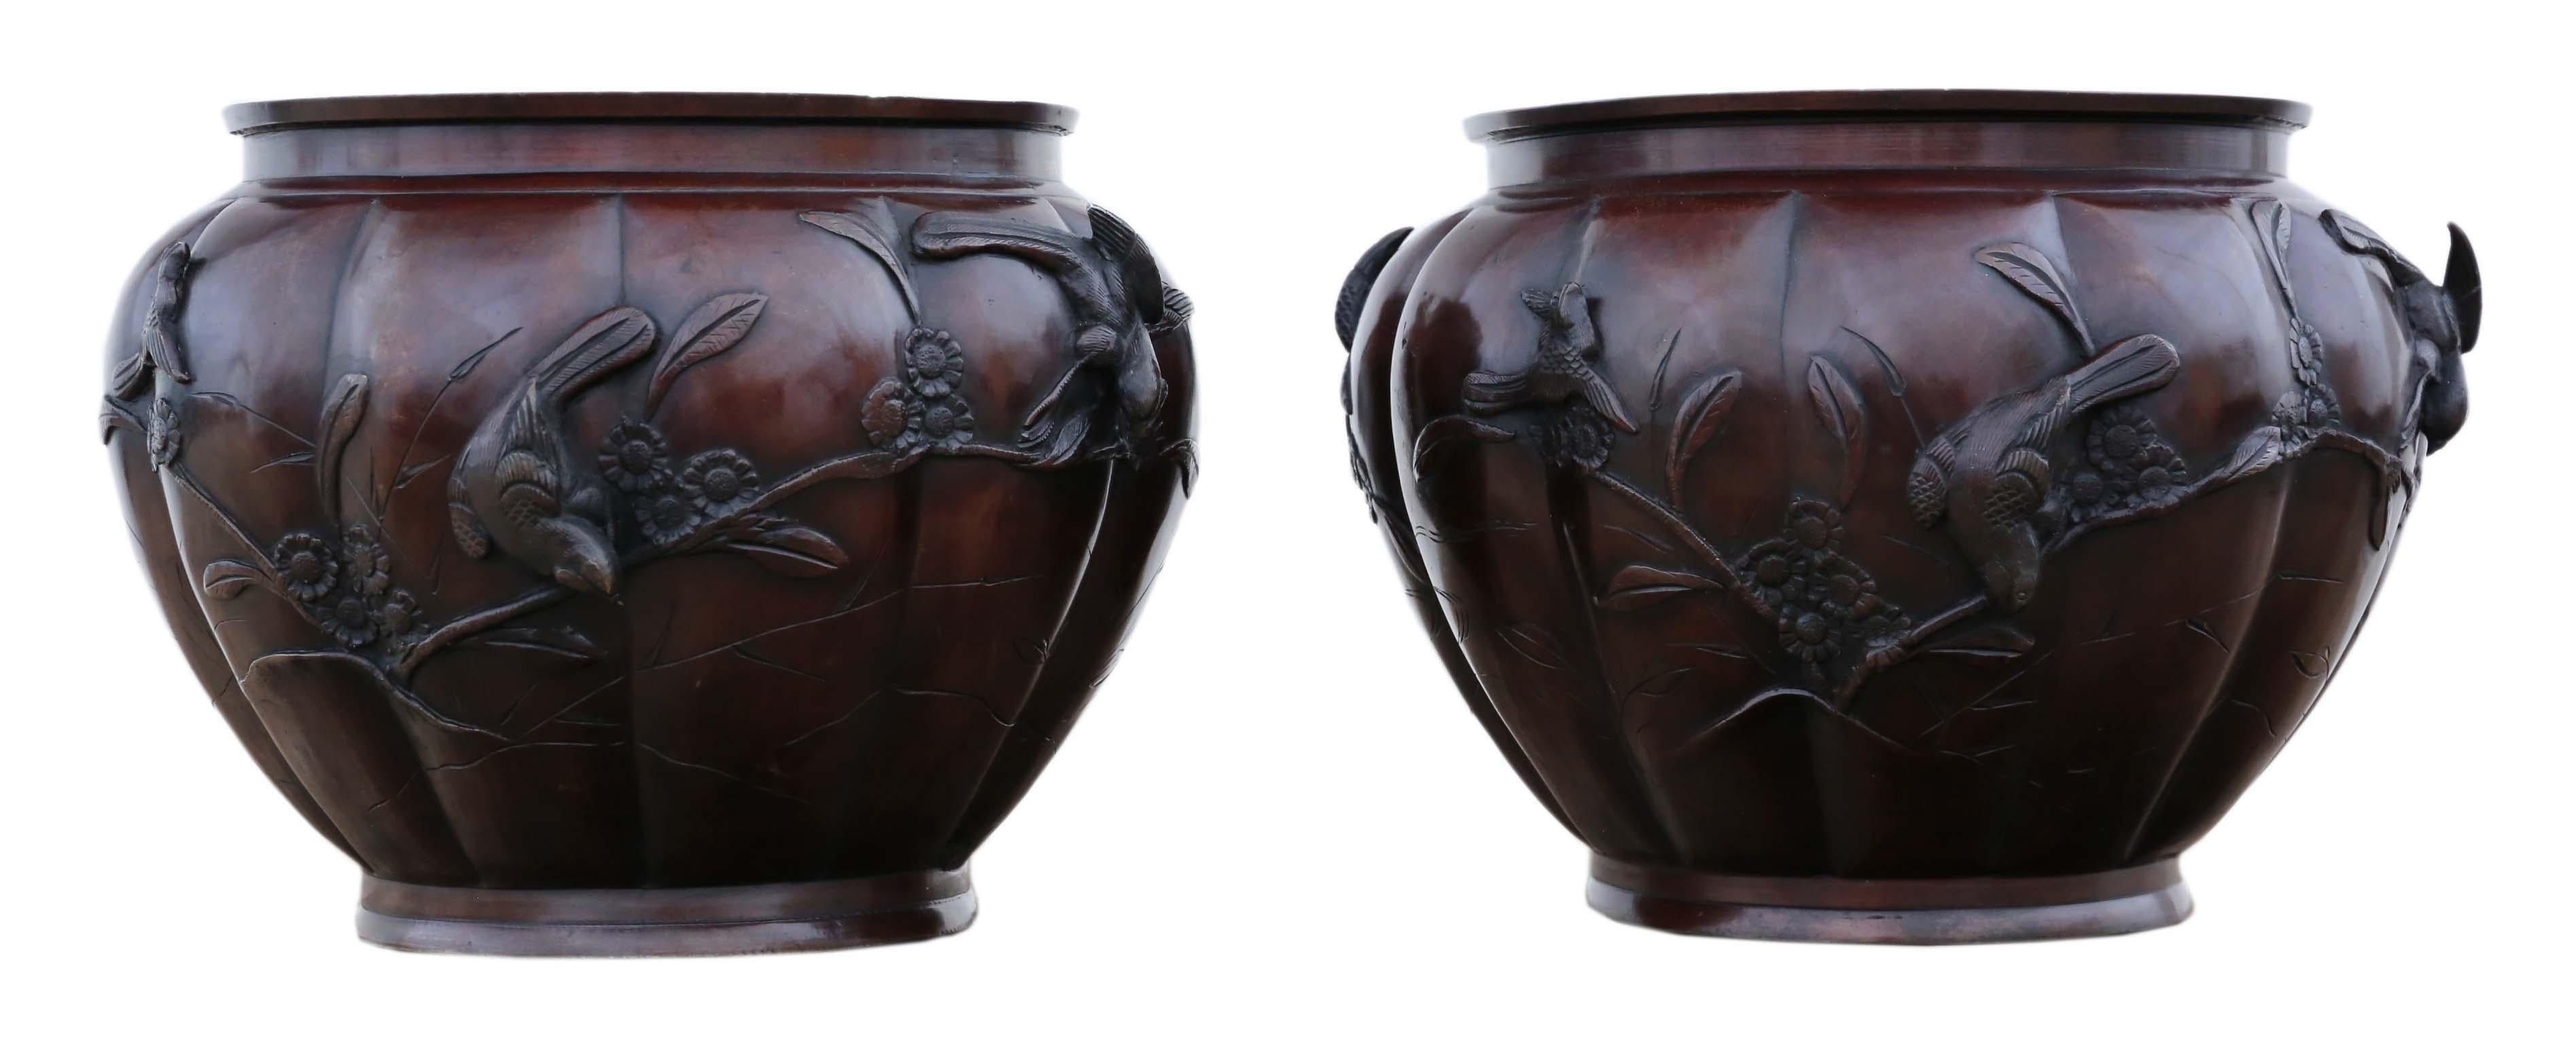 Antique large pair of Japanese bronze jardinières, planters, or bowls from the 19th century, Meiji period.

Would look amazing in the right location. Great color and patina. Very rare pair of a large size.

Overall maximum dimensions, each: 32cm